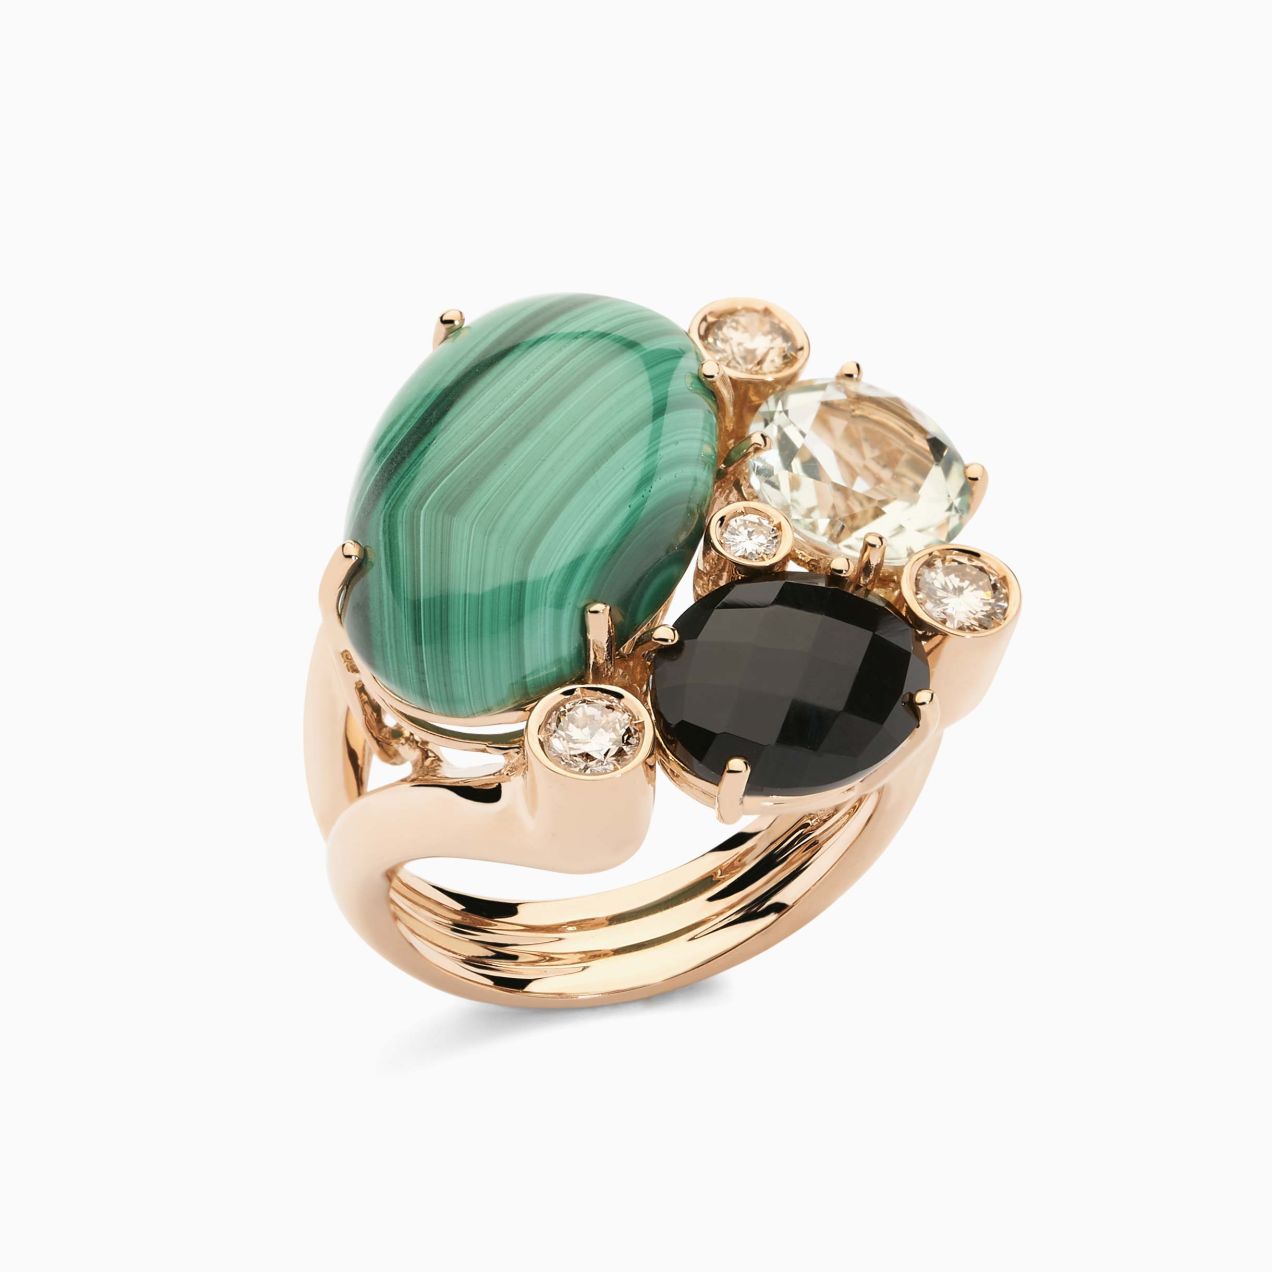 Couloured Gemstone Ring